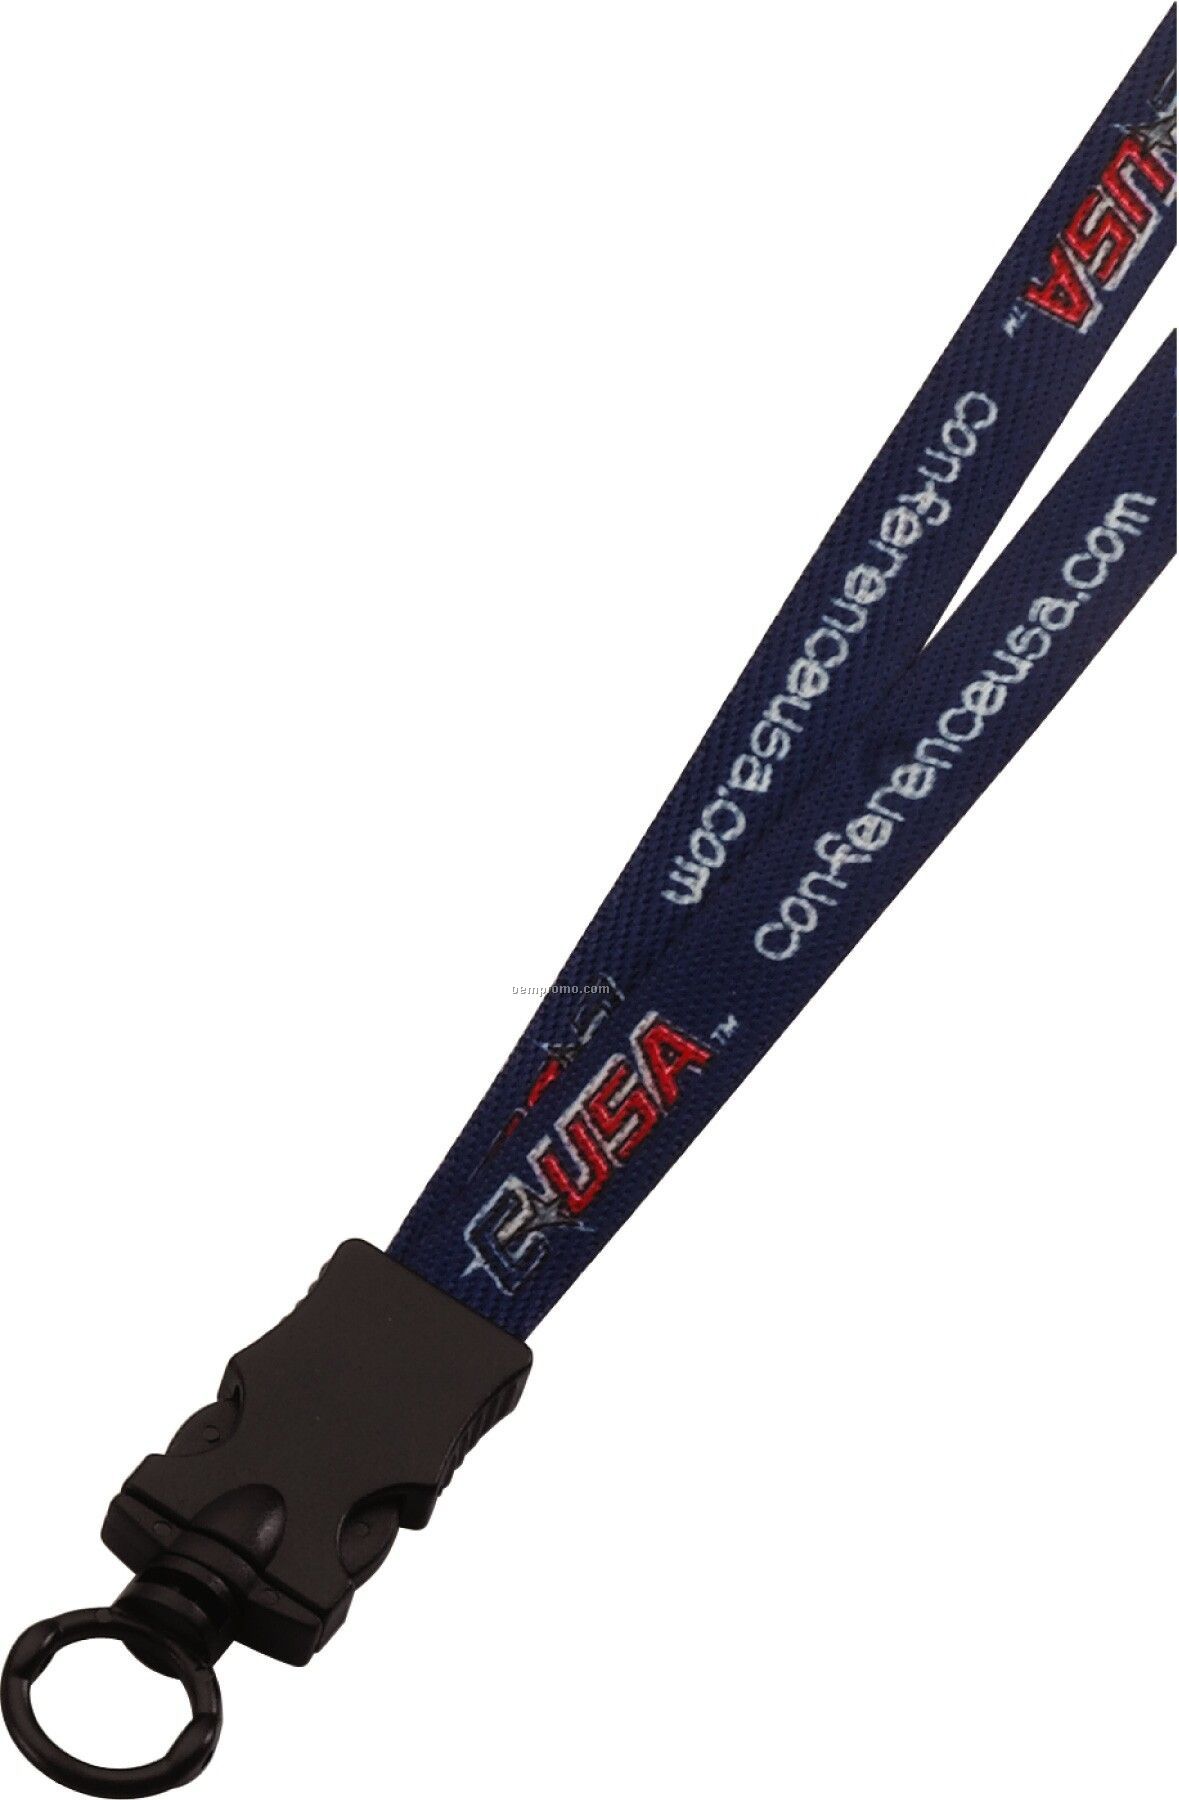 1/2" Waffle Weave Dye Sublimated Lanyard W/ Snap Buckle Release & O-ring